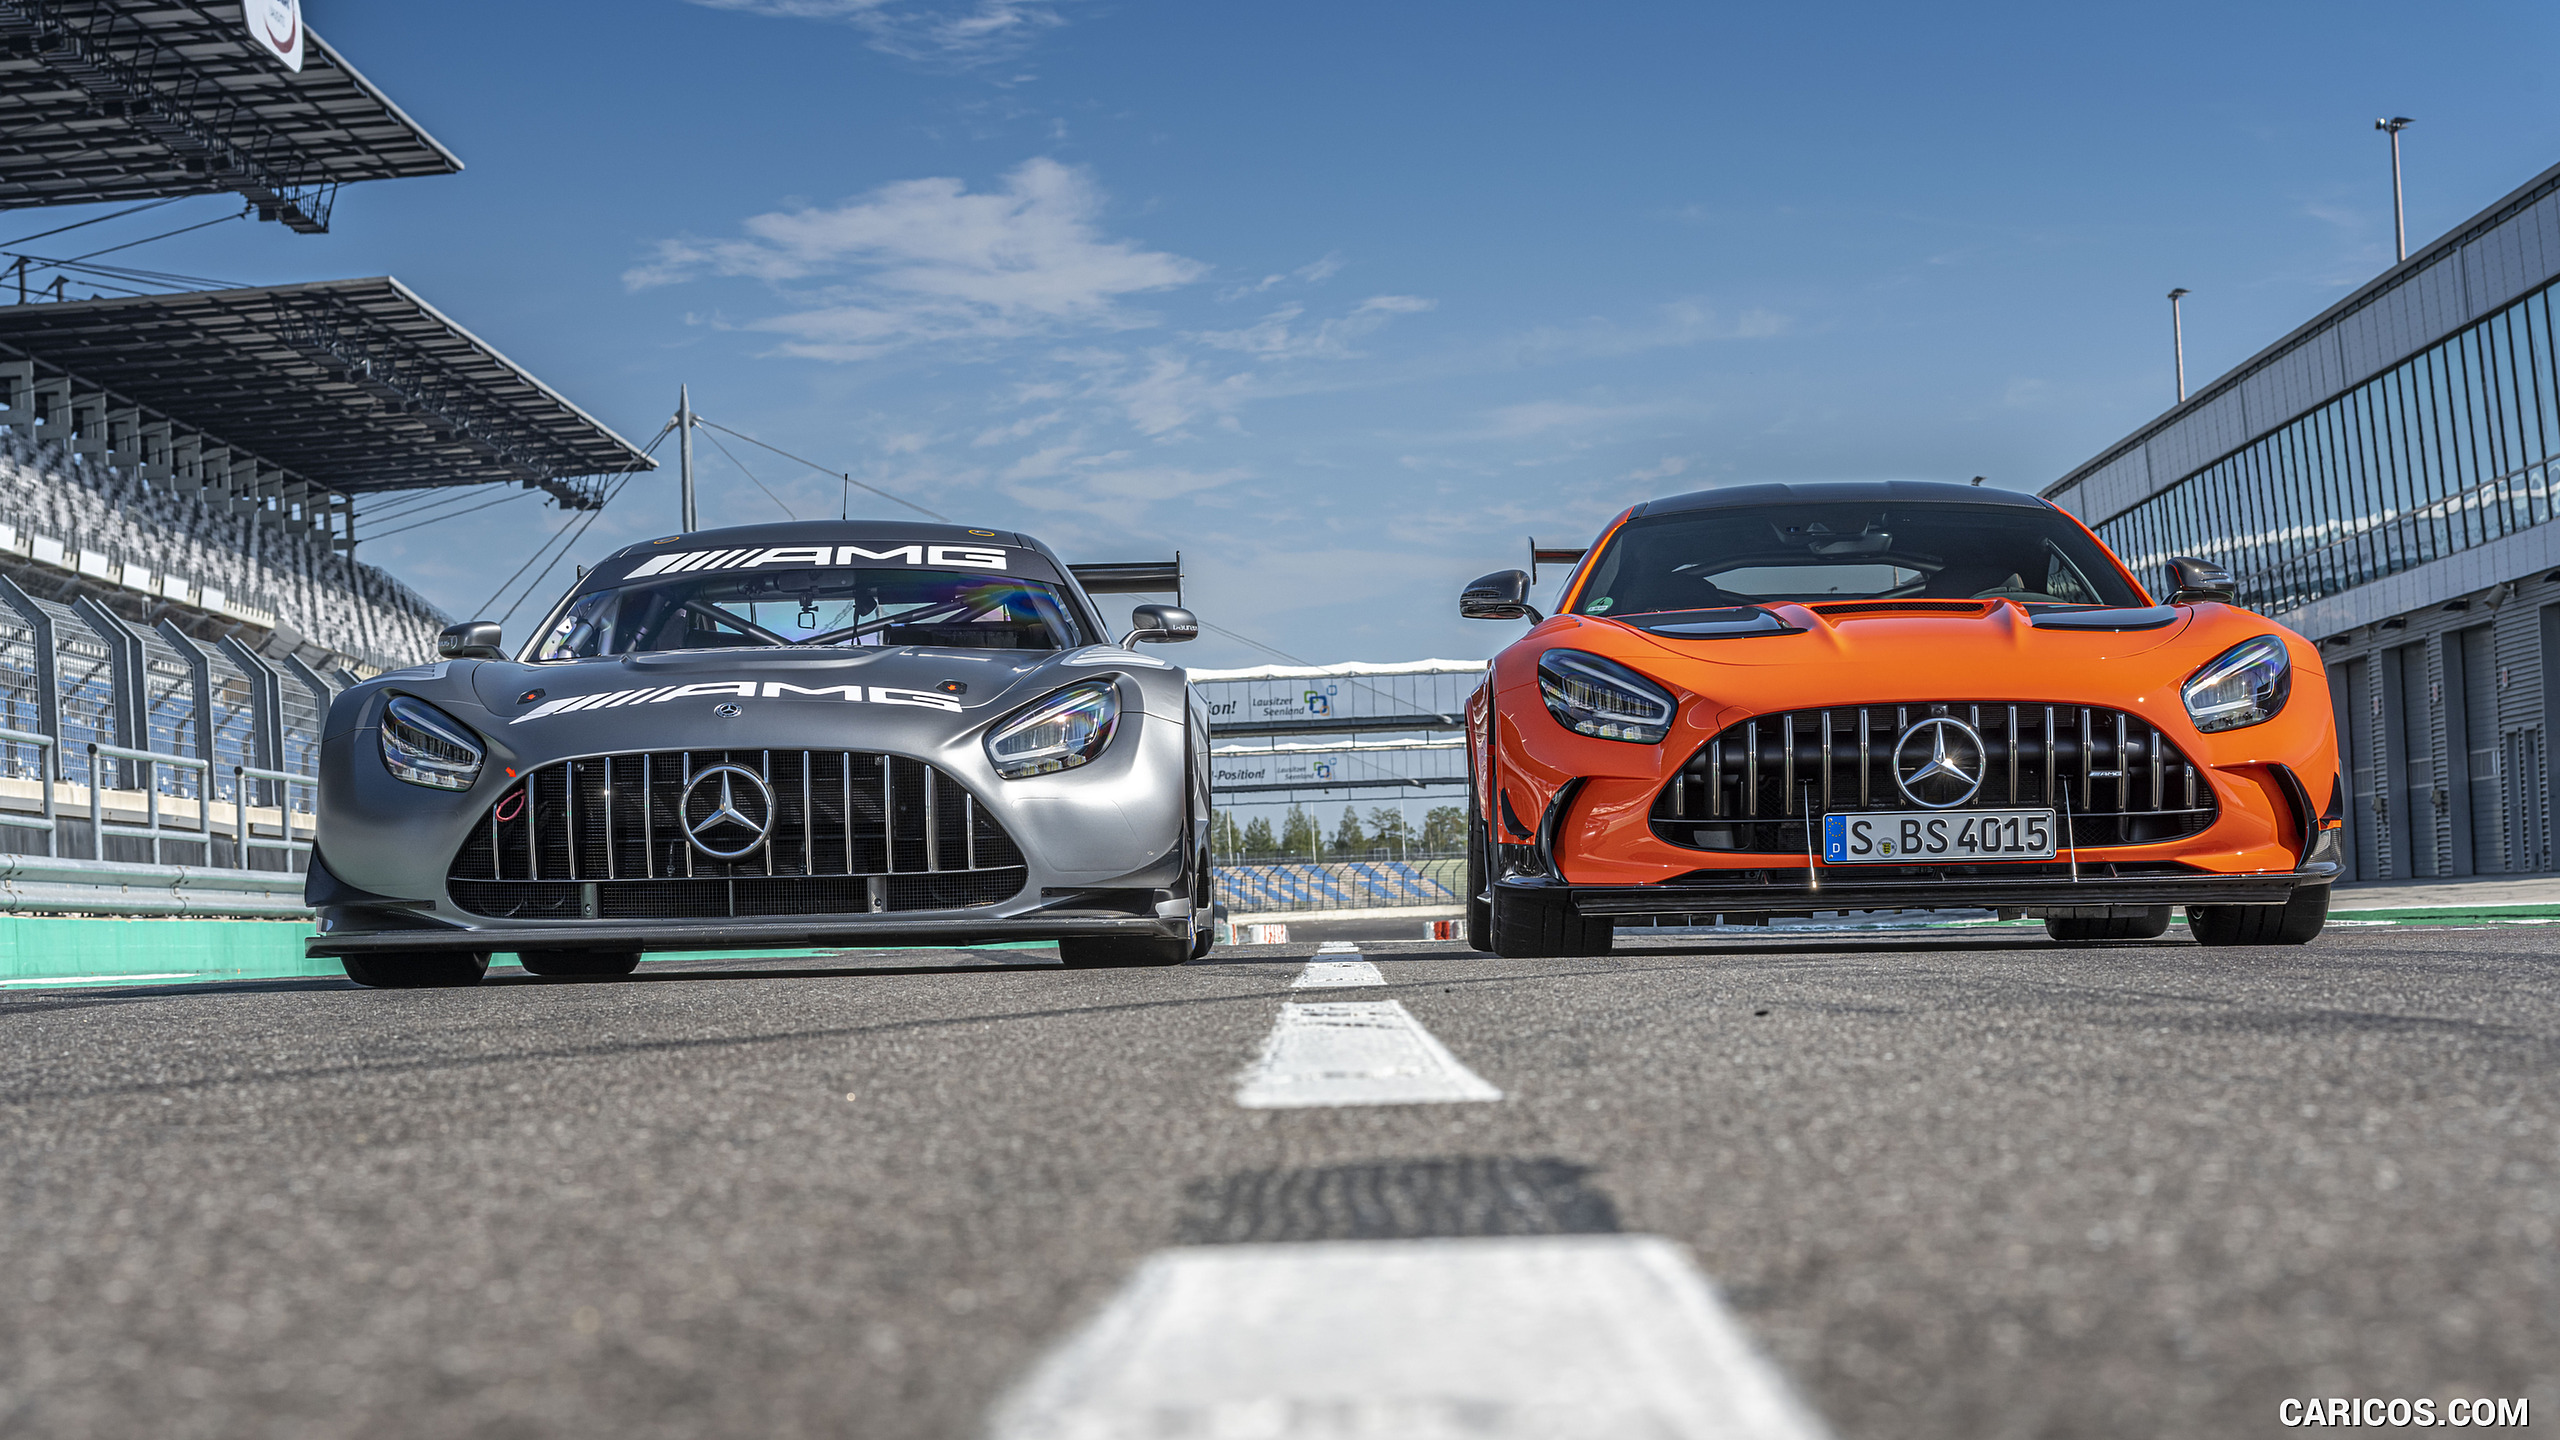 2021 Mercedes-AMG GT Black Series (Color: Magma Beam) and AMG GT3 Racing Car, #150 of 215